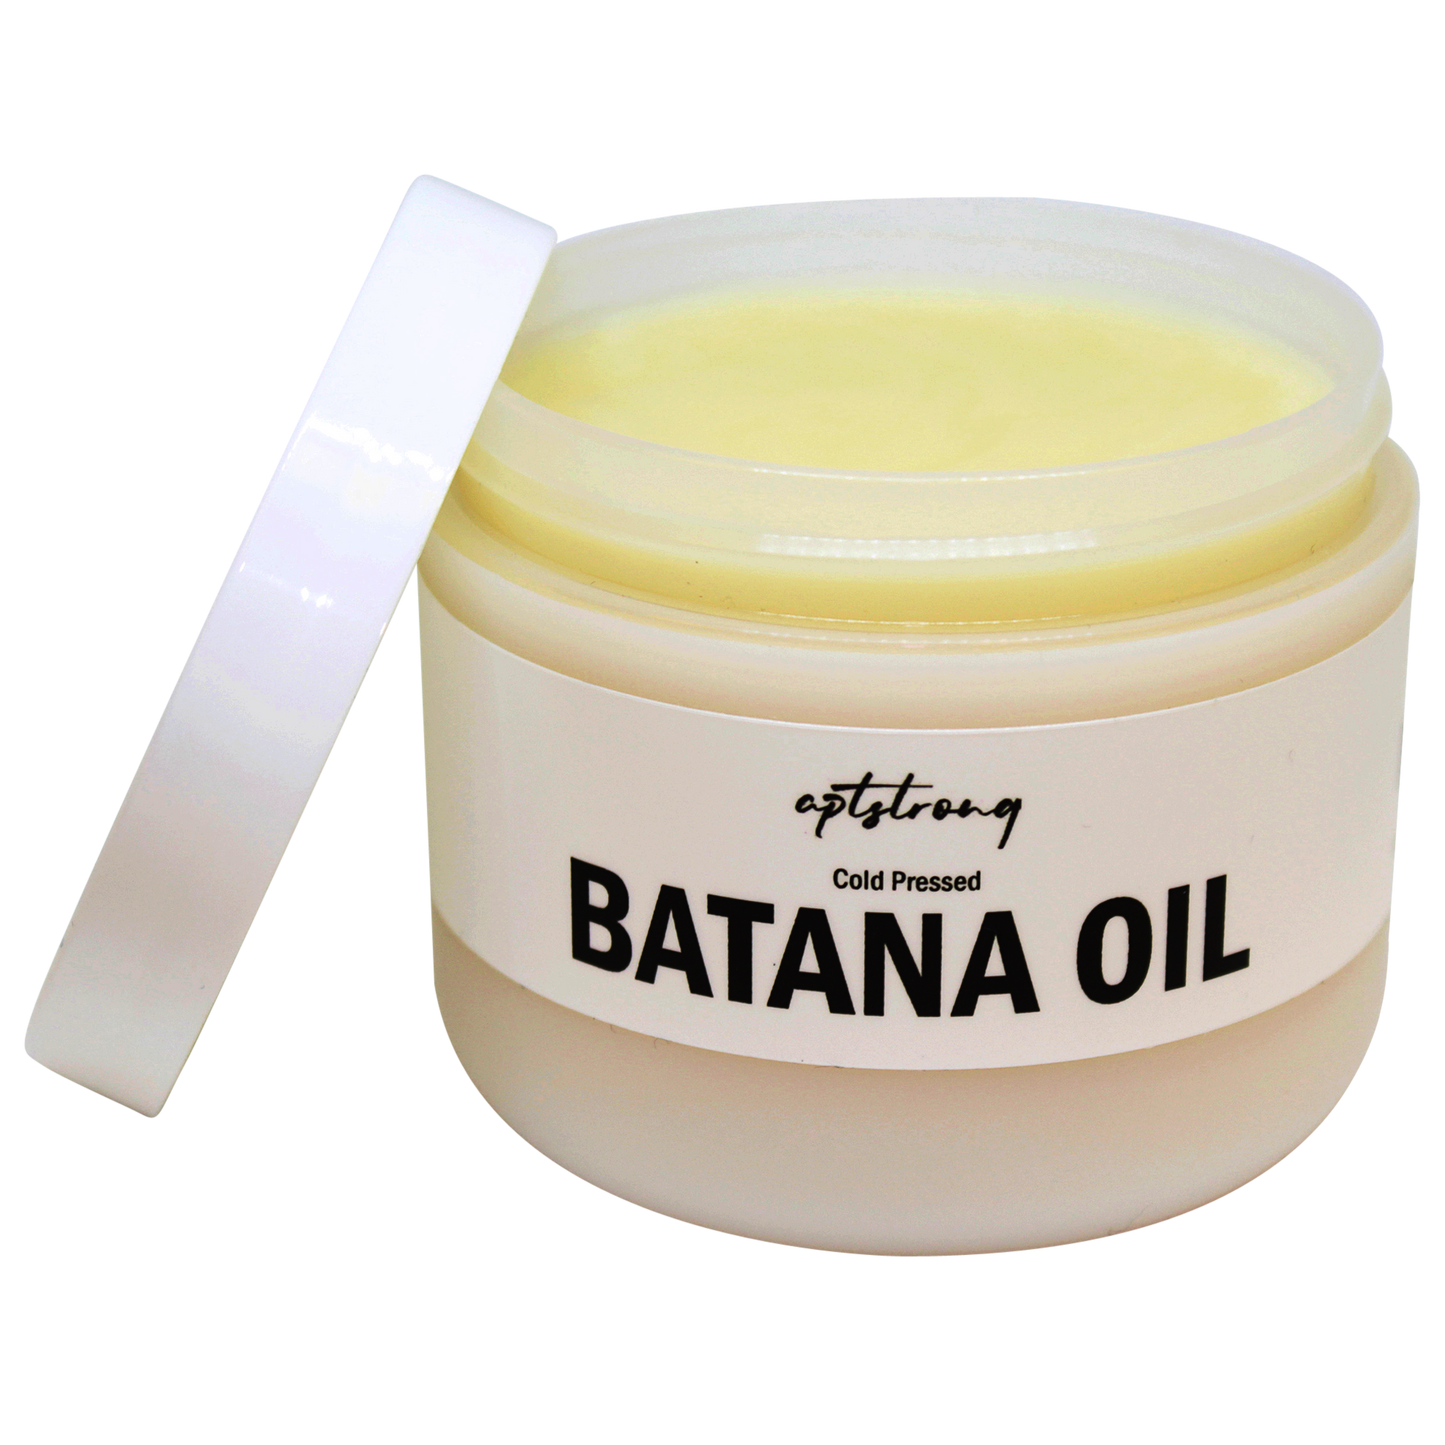 Batana Oil for Hair Growth – 100% Raw & Unrefined - Organic Cold Pressed, No Smokey Odor - Made in USA from Honduras - 4 oz Solid